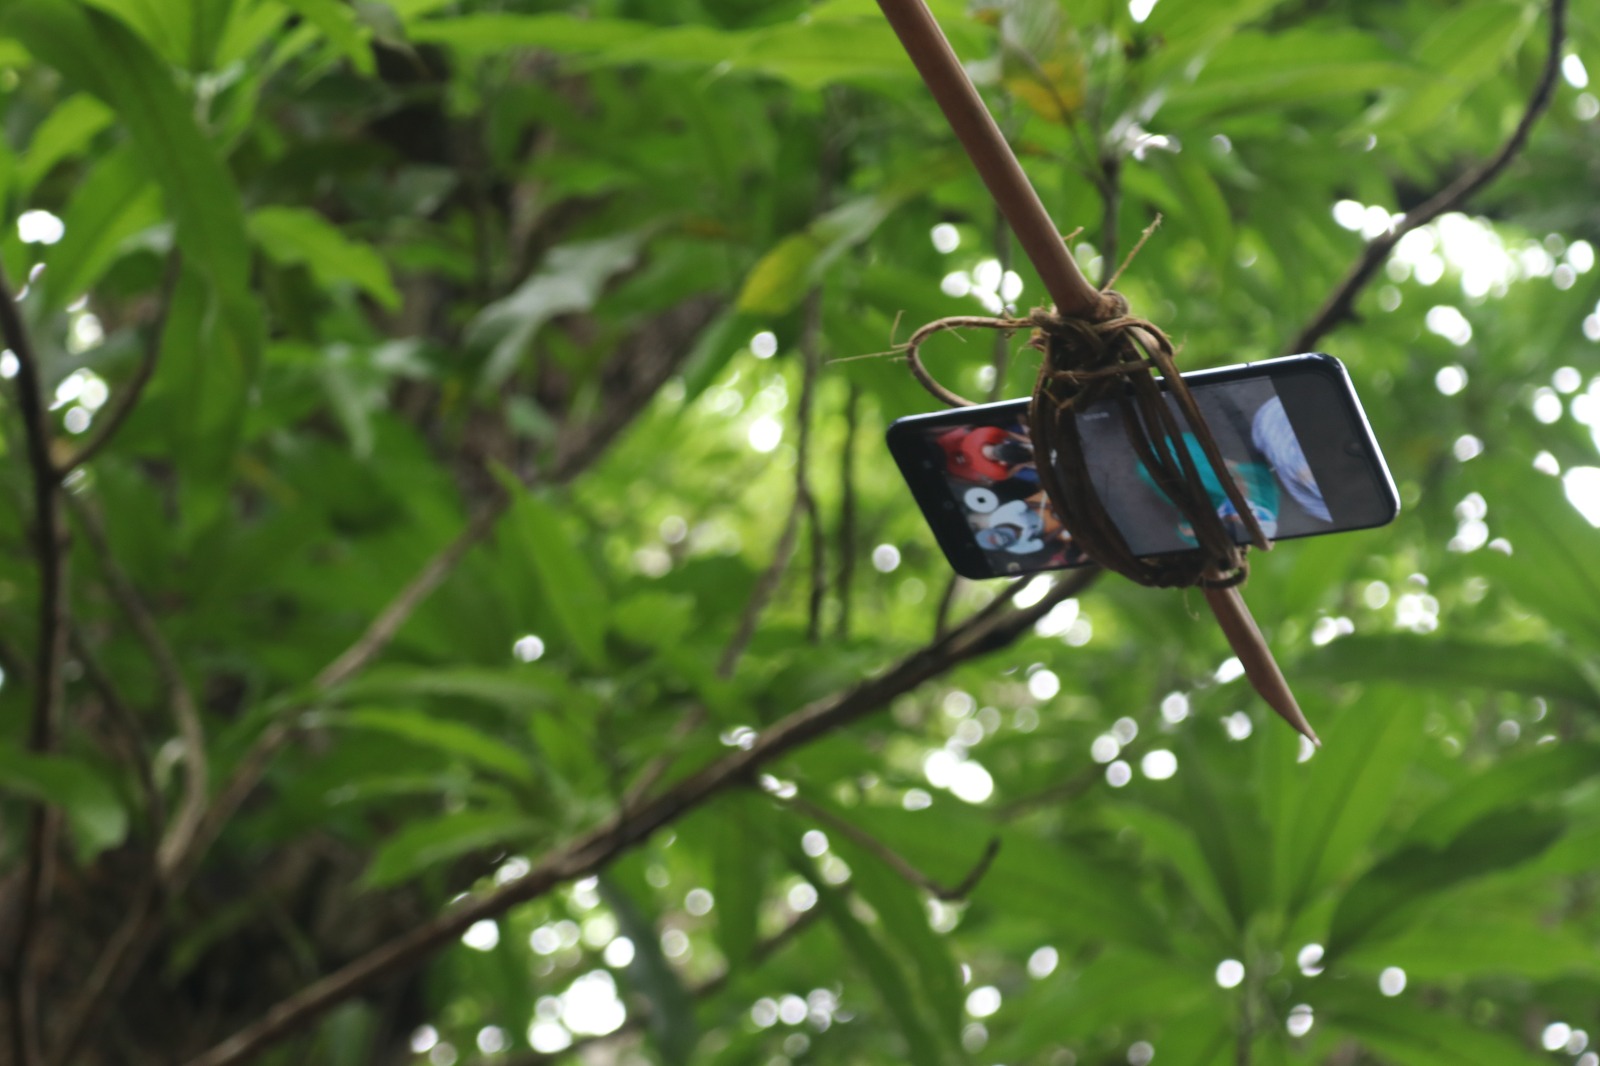 The bamboo-drone has a smartphone attached to the end of a curved bamboo pole and captures images from above like a drone. Photo: Quilombo TV